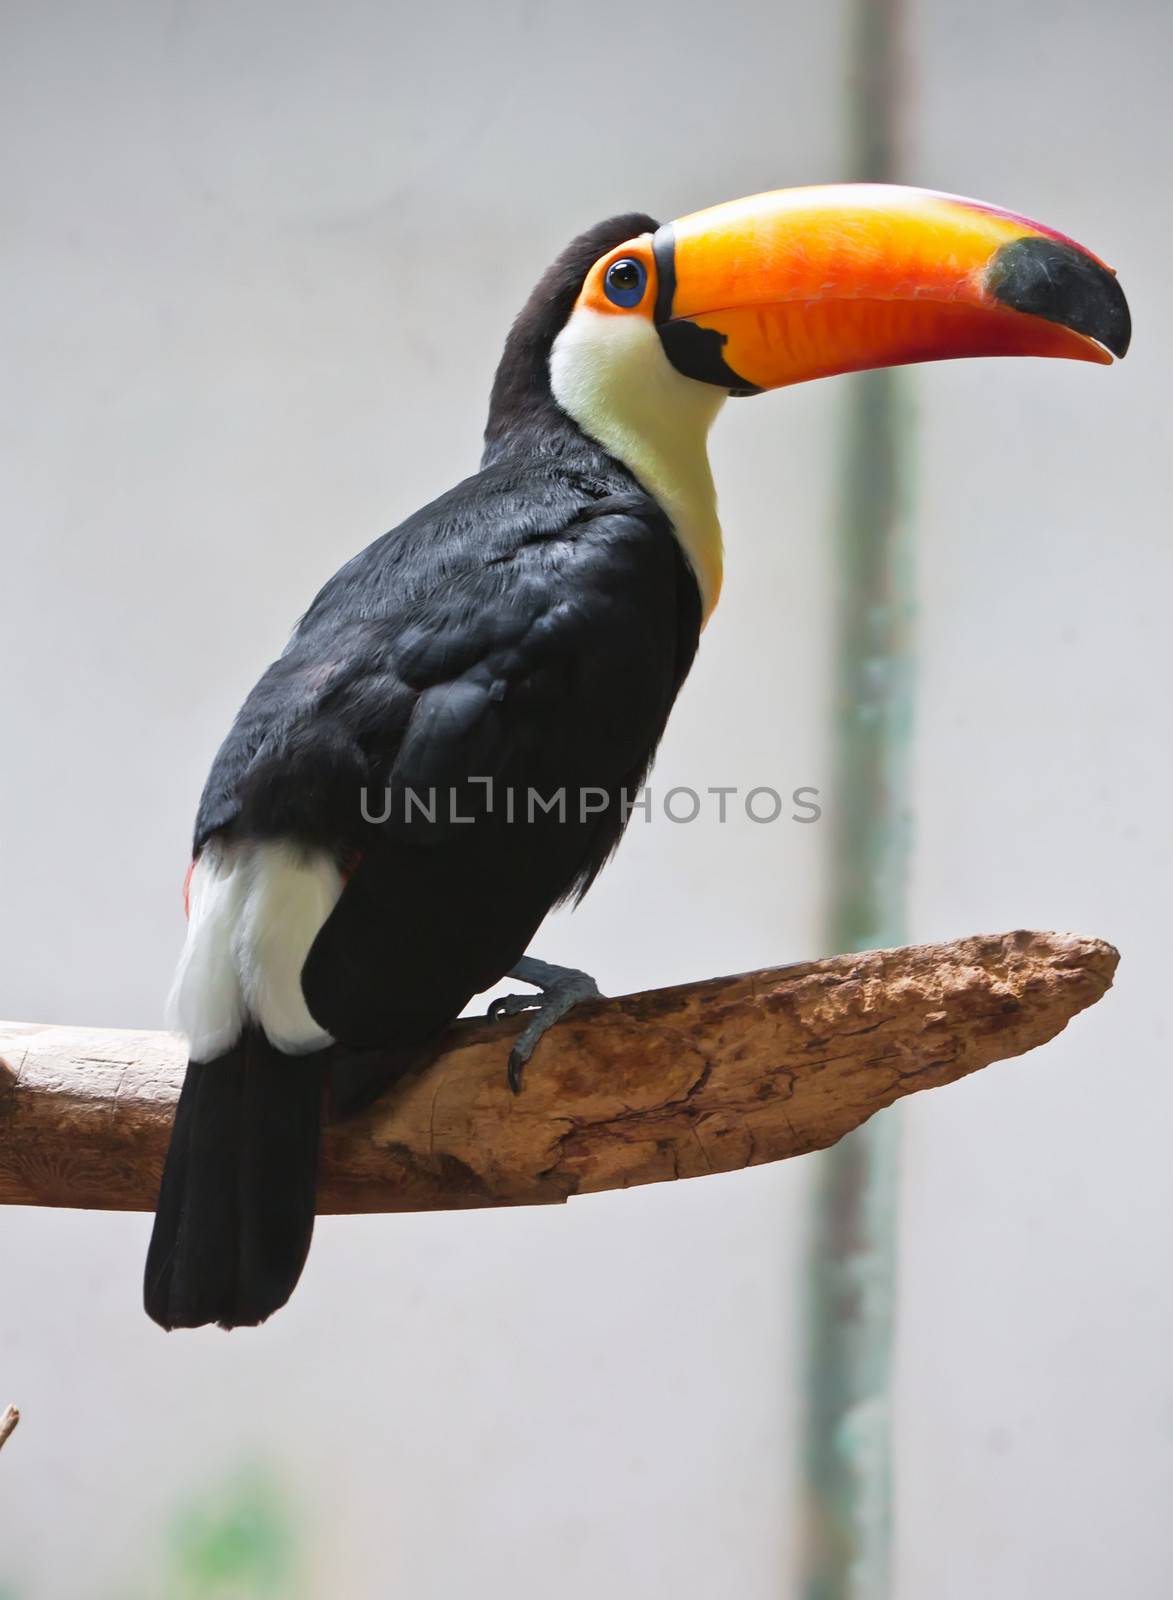 Cute exotic toucan with huge beak sitting on small stick